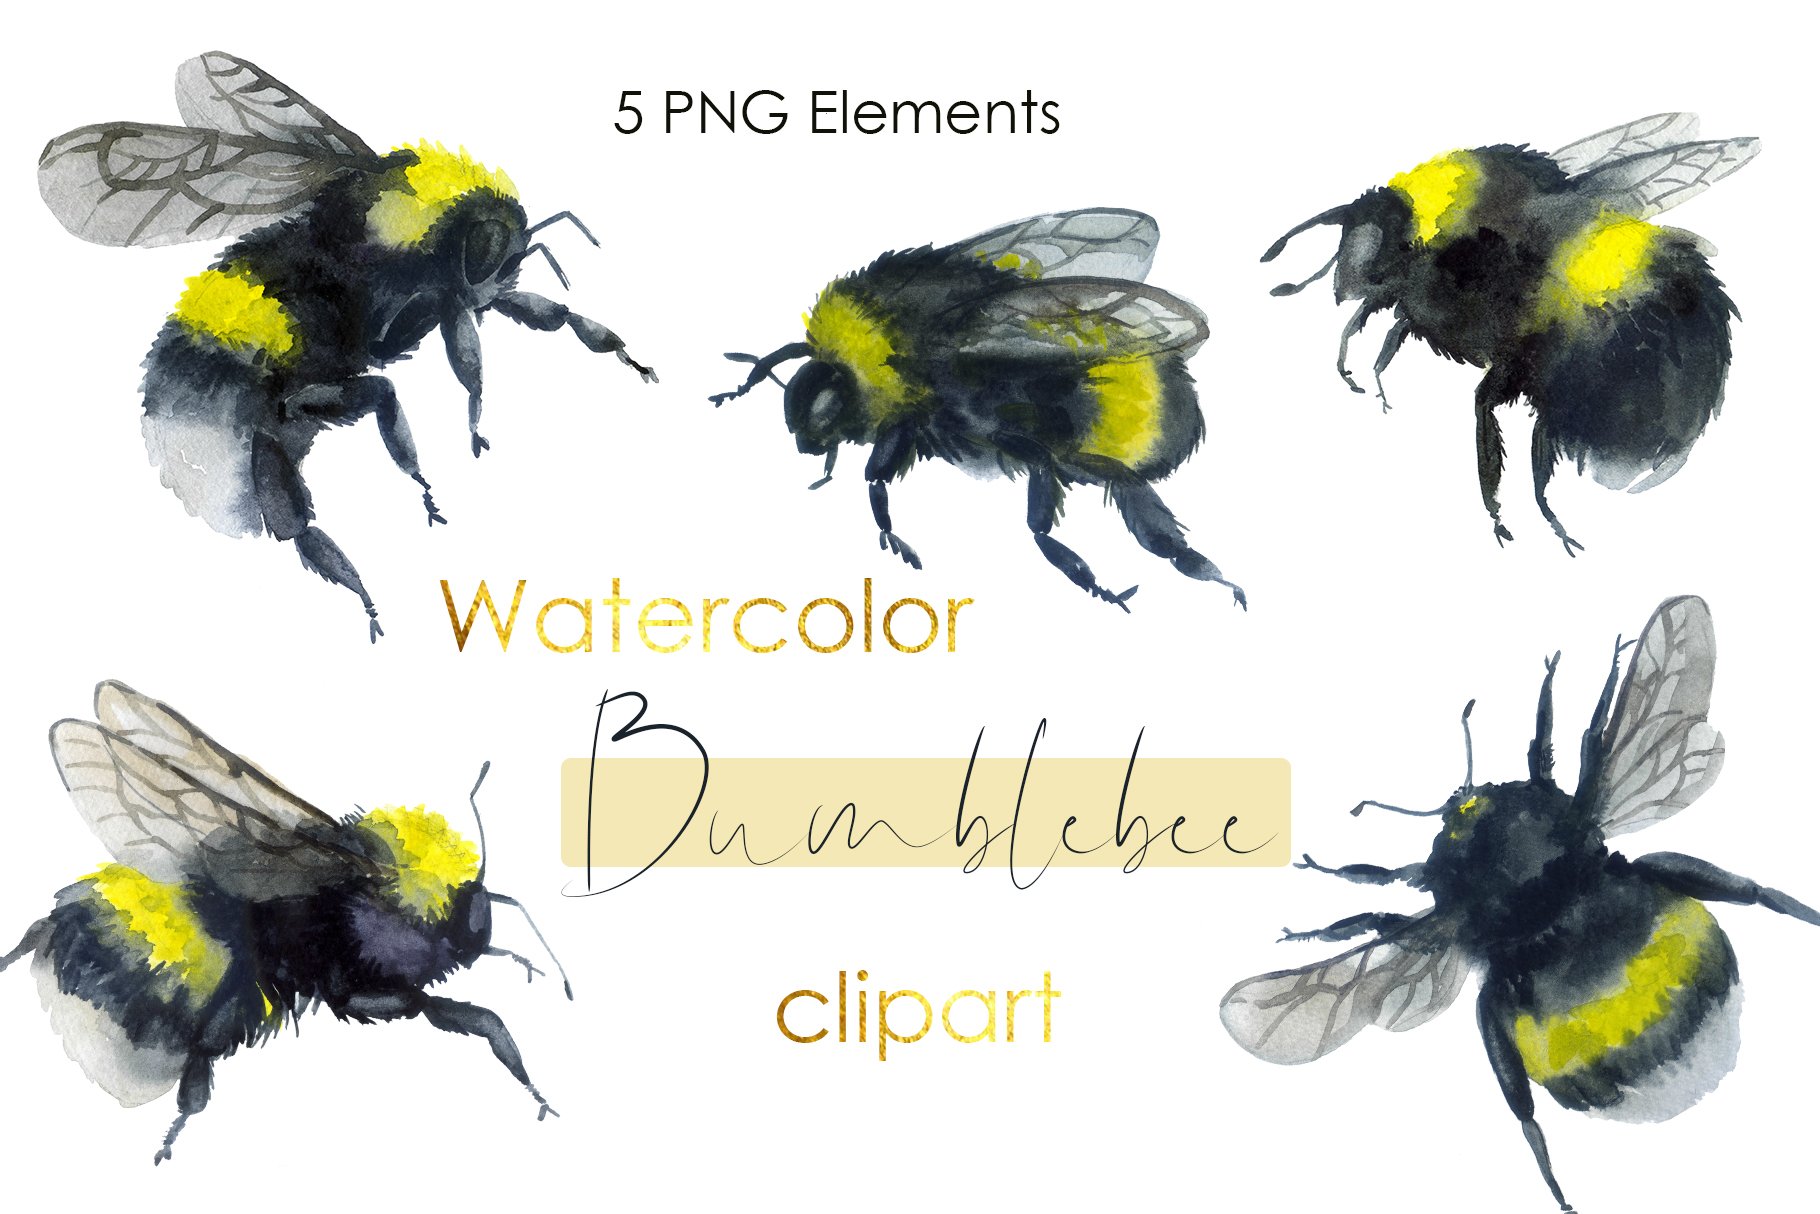 Watercolor bee Clipart. Bumble bee cover image.